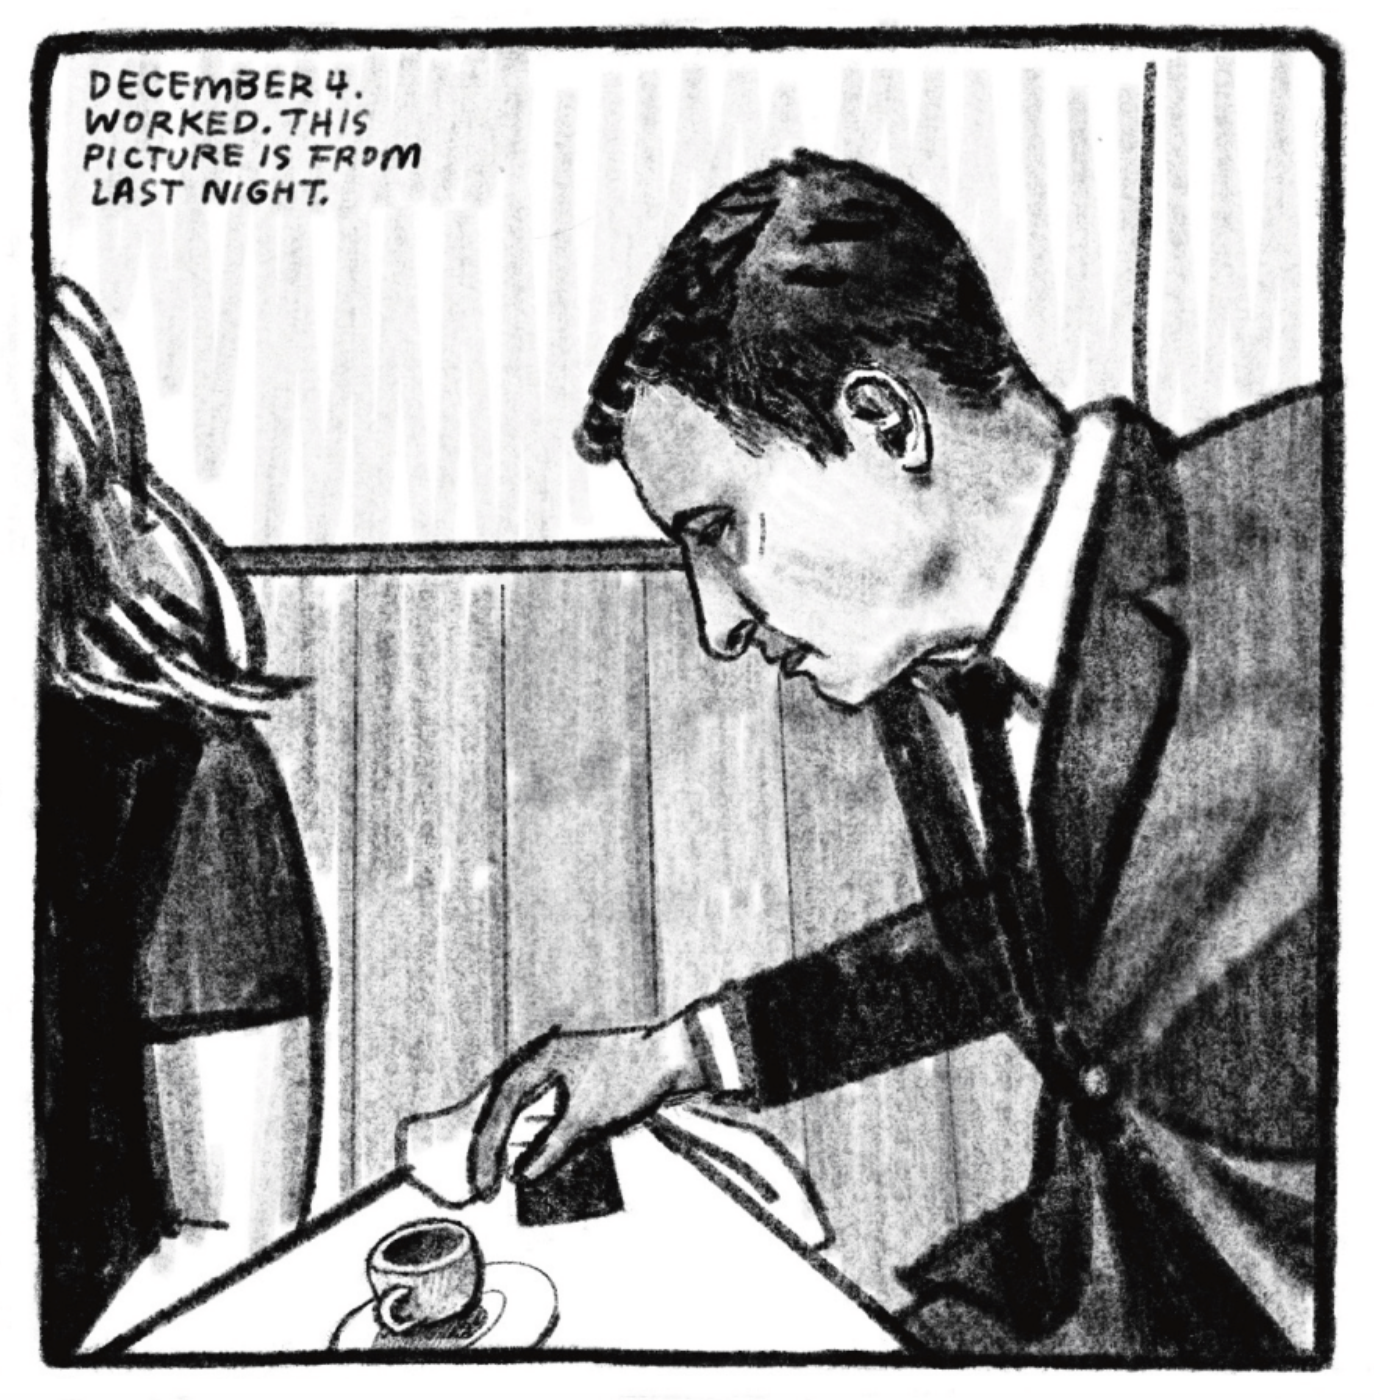 Tony is leaning over a table, reaching for a tiny tea cup. He is dressed in a suit and tie. Kimâ€™s arm and hair are visible to the left, mostly cutoff from the panel. â€œDecember 4. Worked. This picture is from last night.â€